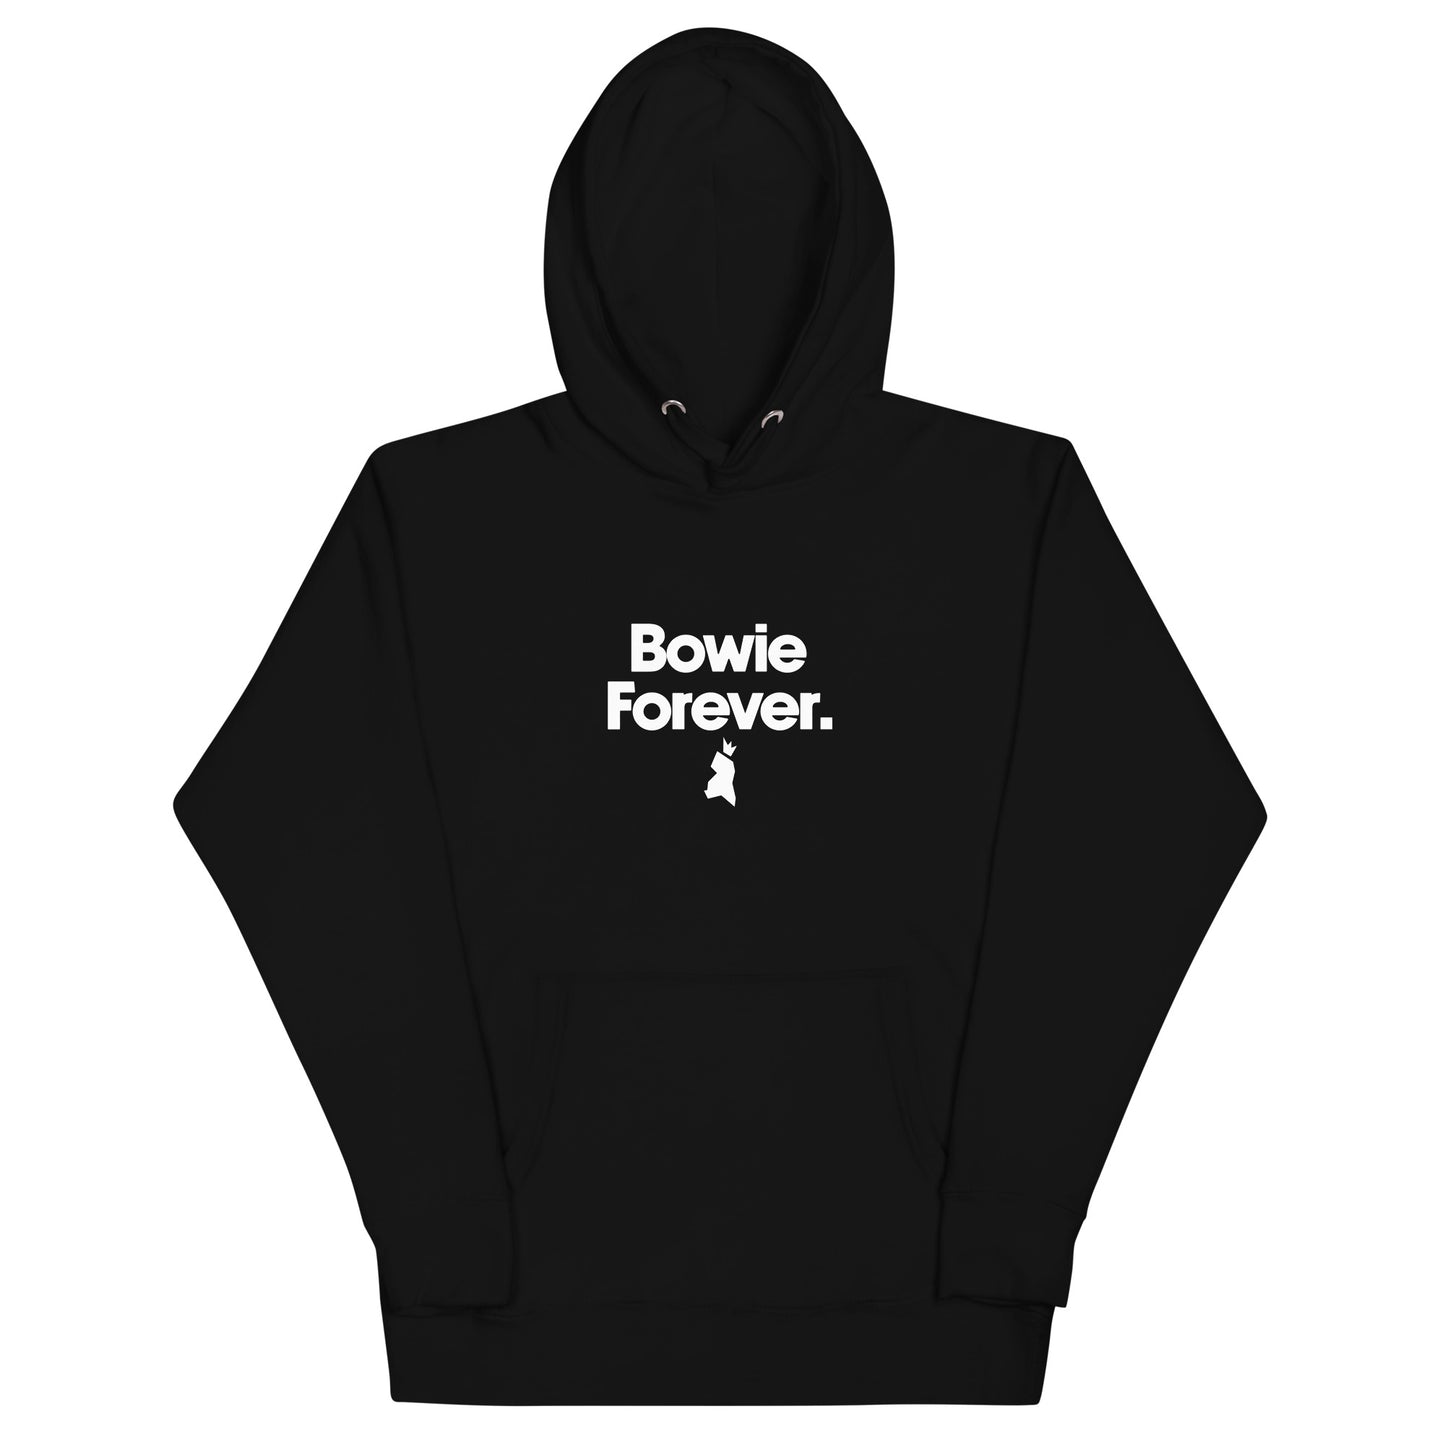 Bowie Forever Unisex Hoodie